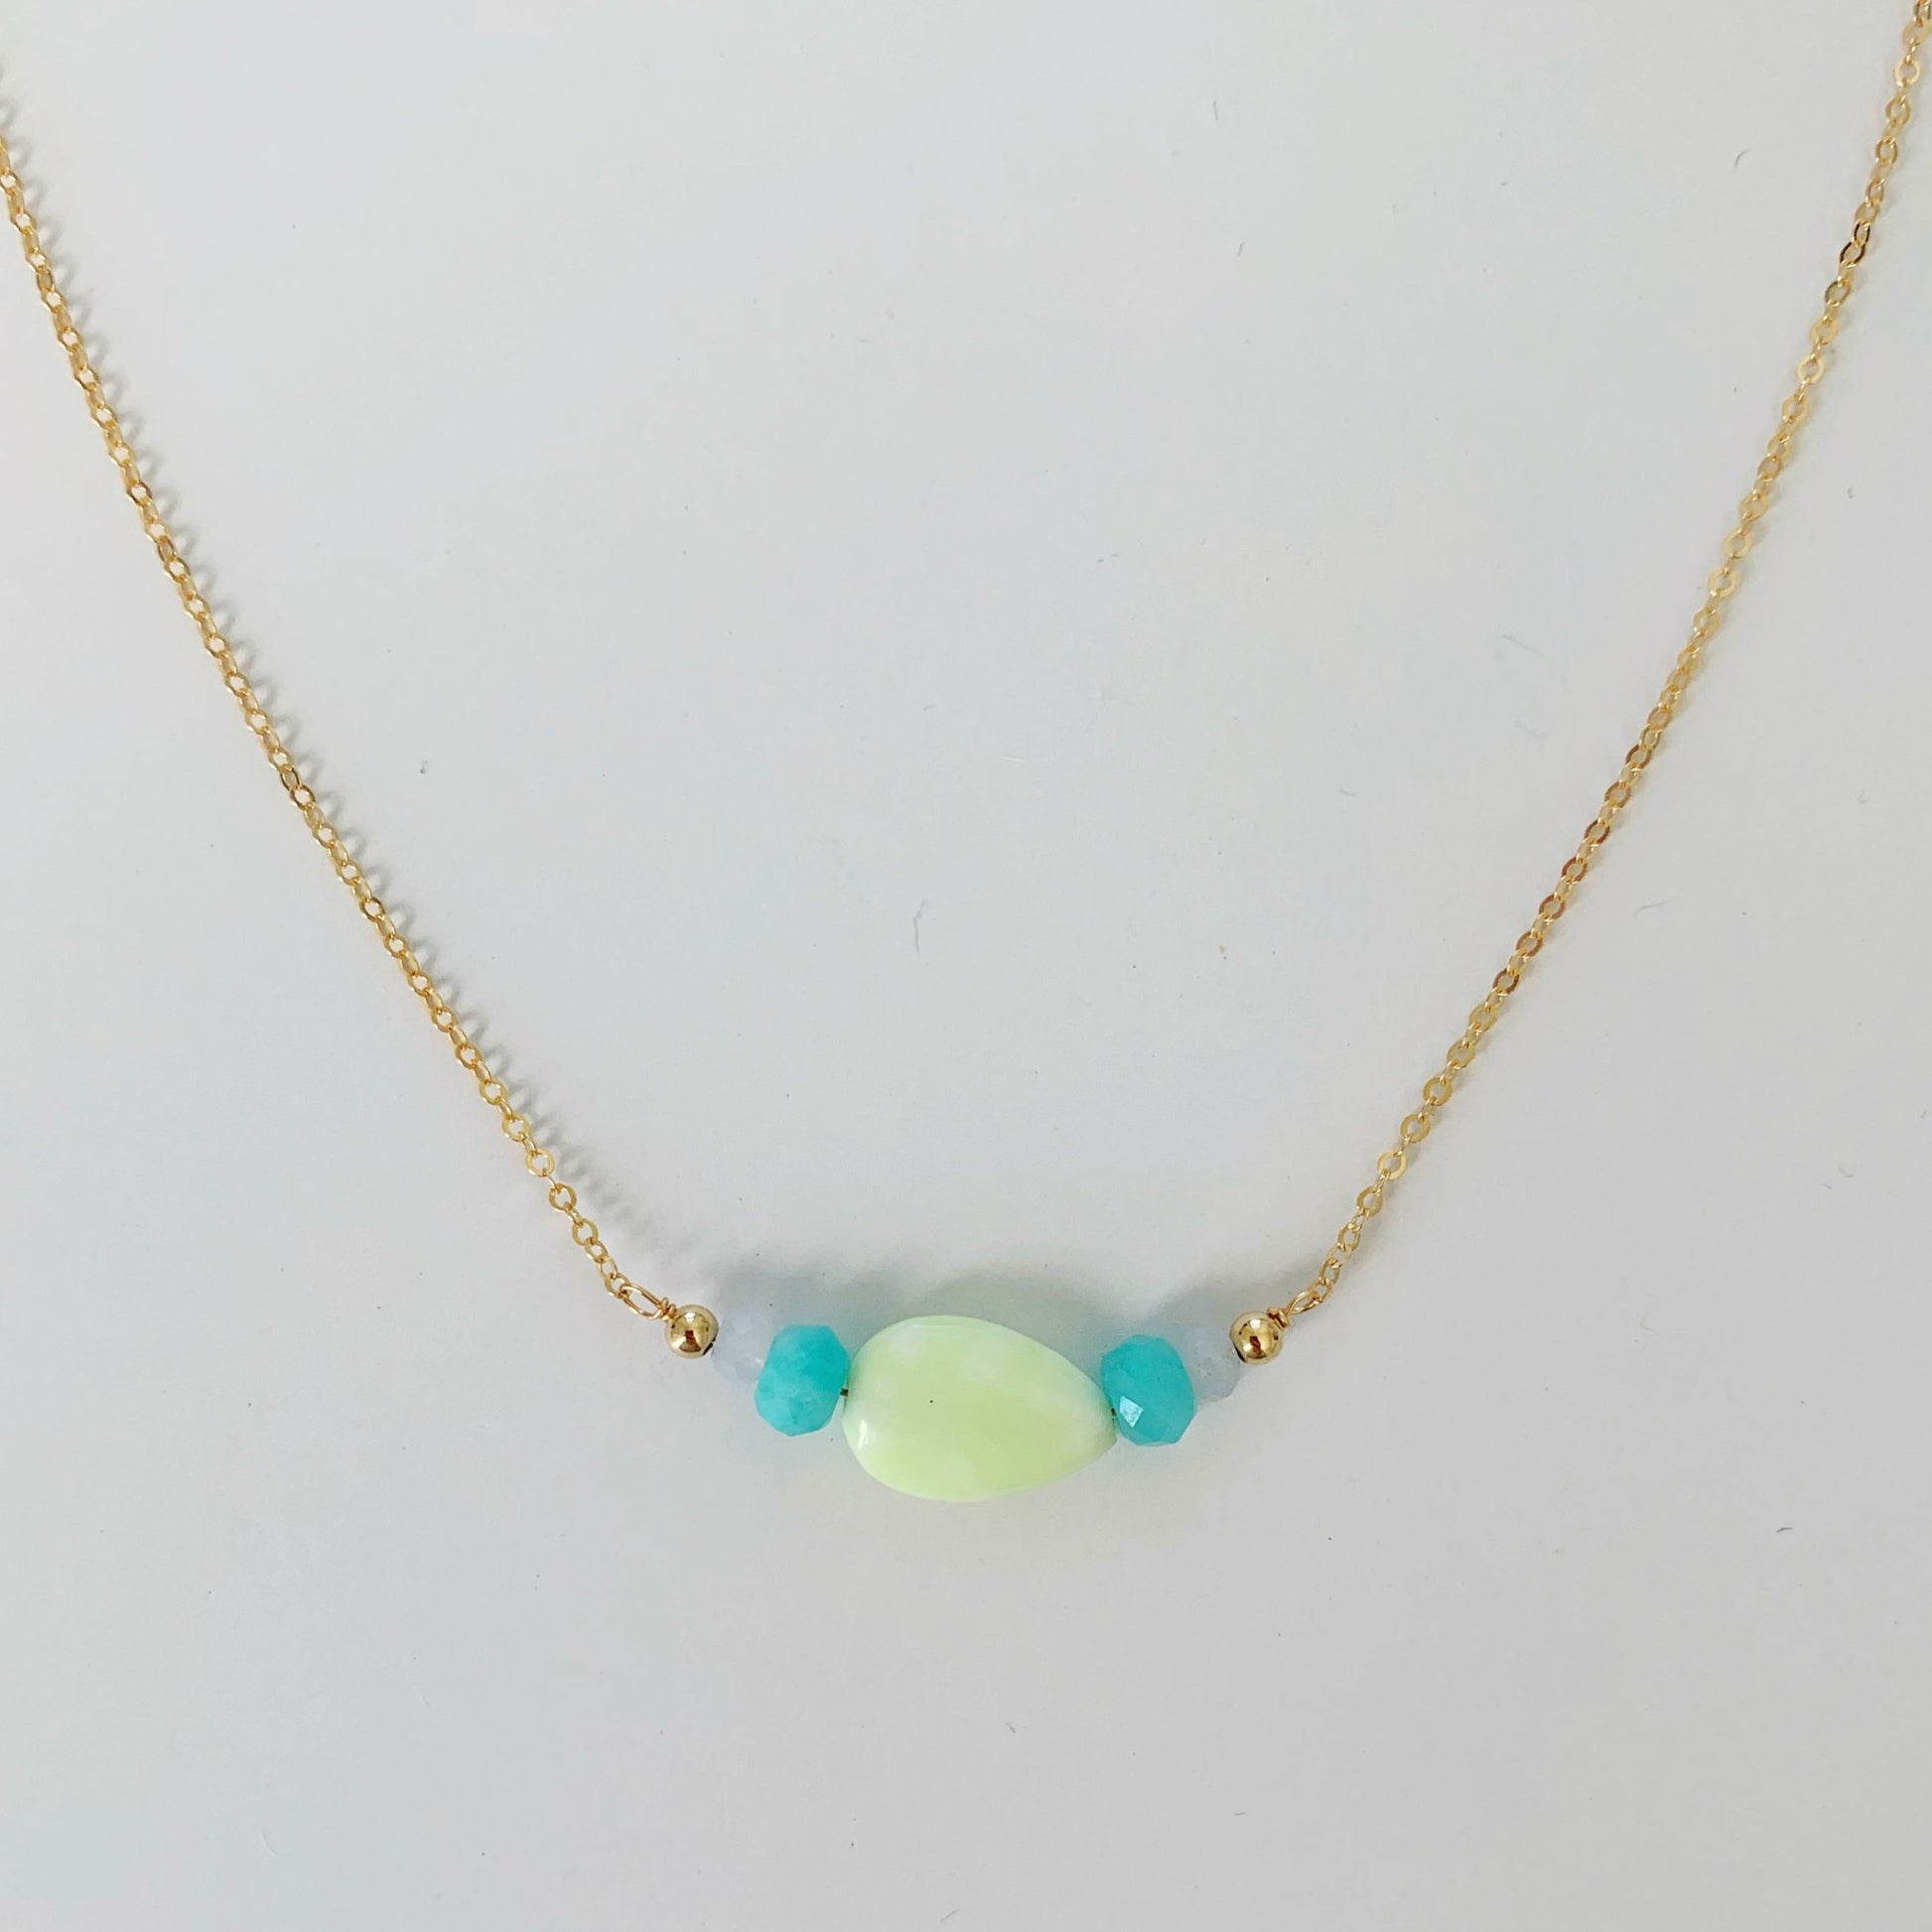 Captiva Necklace by mermaids and madeleines is created with a teardrop lime jade bead with amazonite and blue lace agate on 14k gold filled chain. this necklace is photographed on a white surface